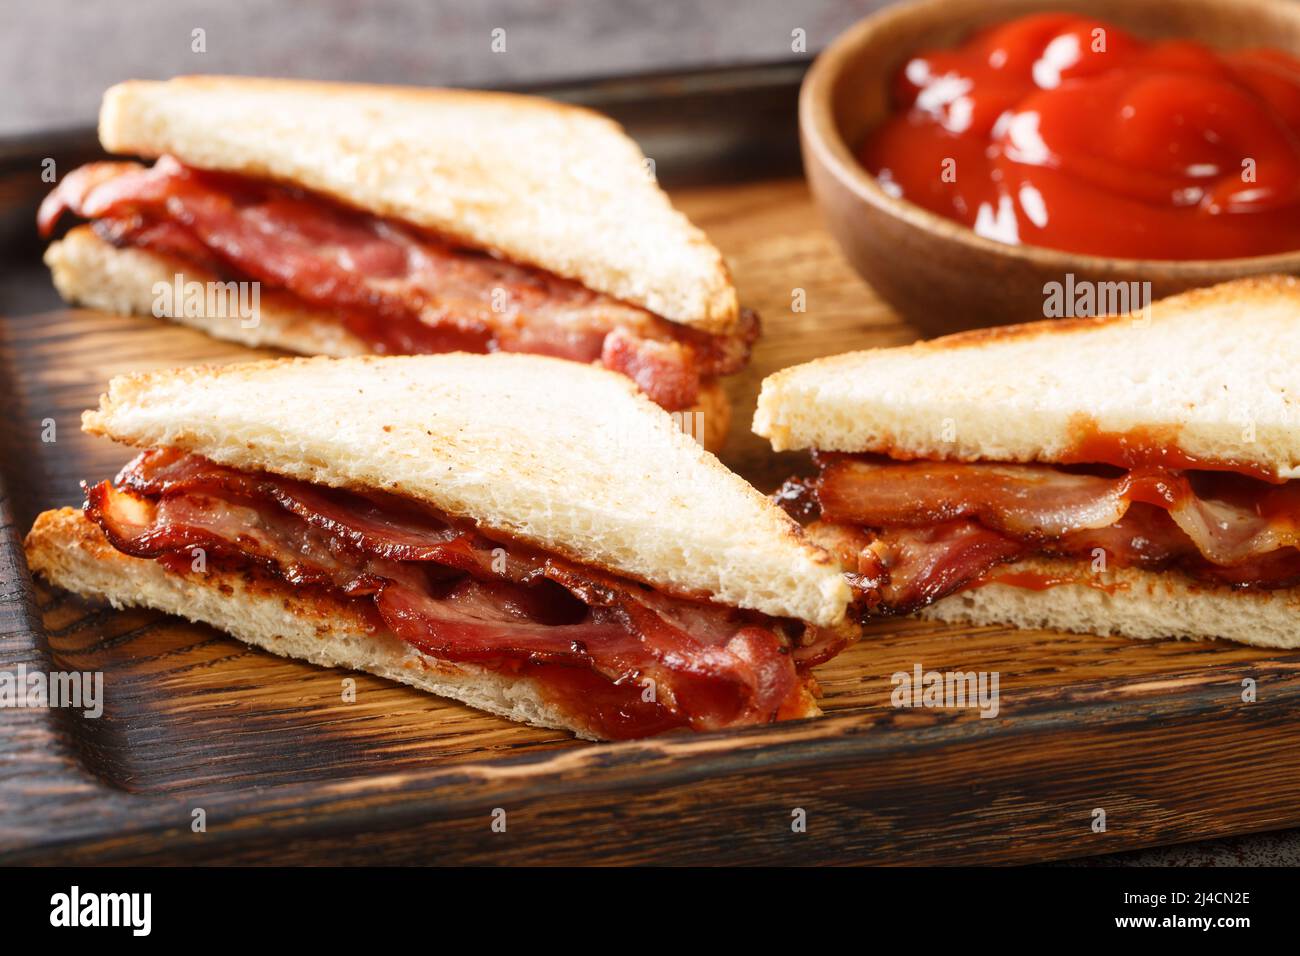 Bacon butty is a British sandwich consisting of crispy bacon, butter, and sauce closeup in the wooden tray on the table. Horizontal Stock Photo